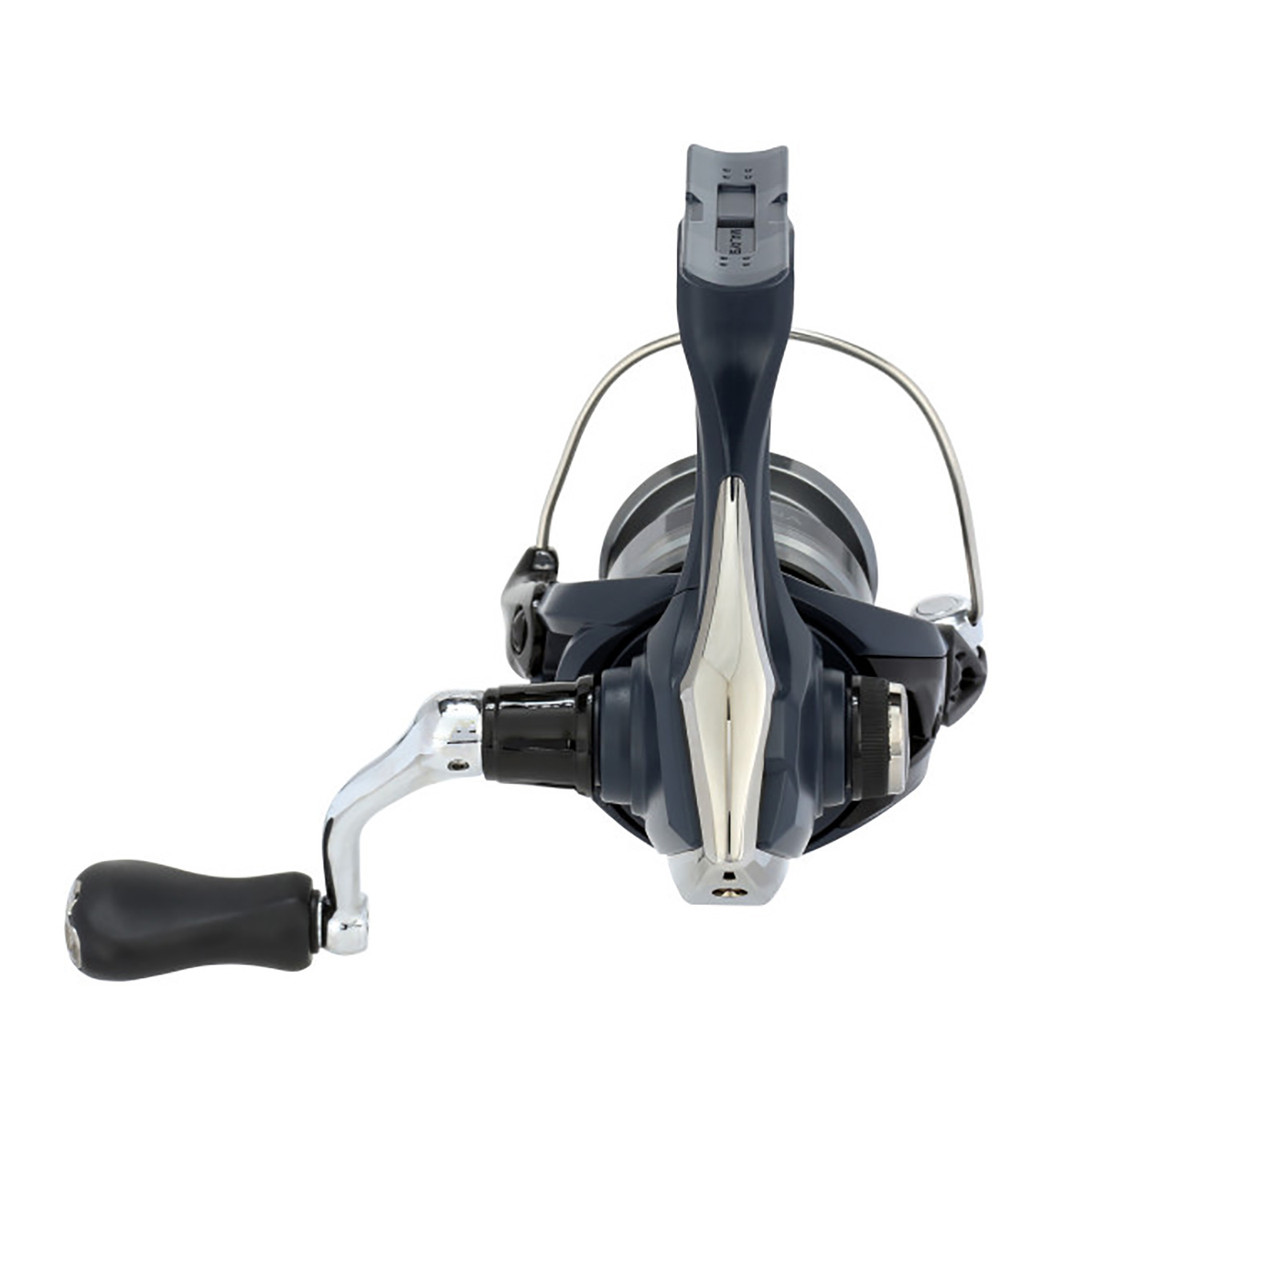 Shimano Catana Rear-Drag Spinning Reel, Size 2500 - Canadian Tire, Сalgary  Grocery Delivery